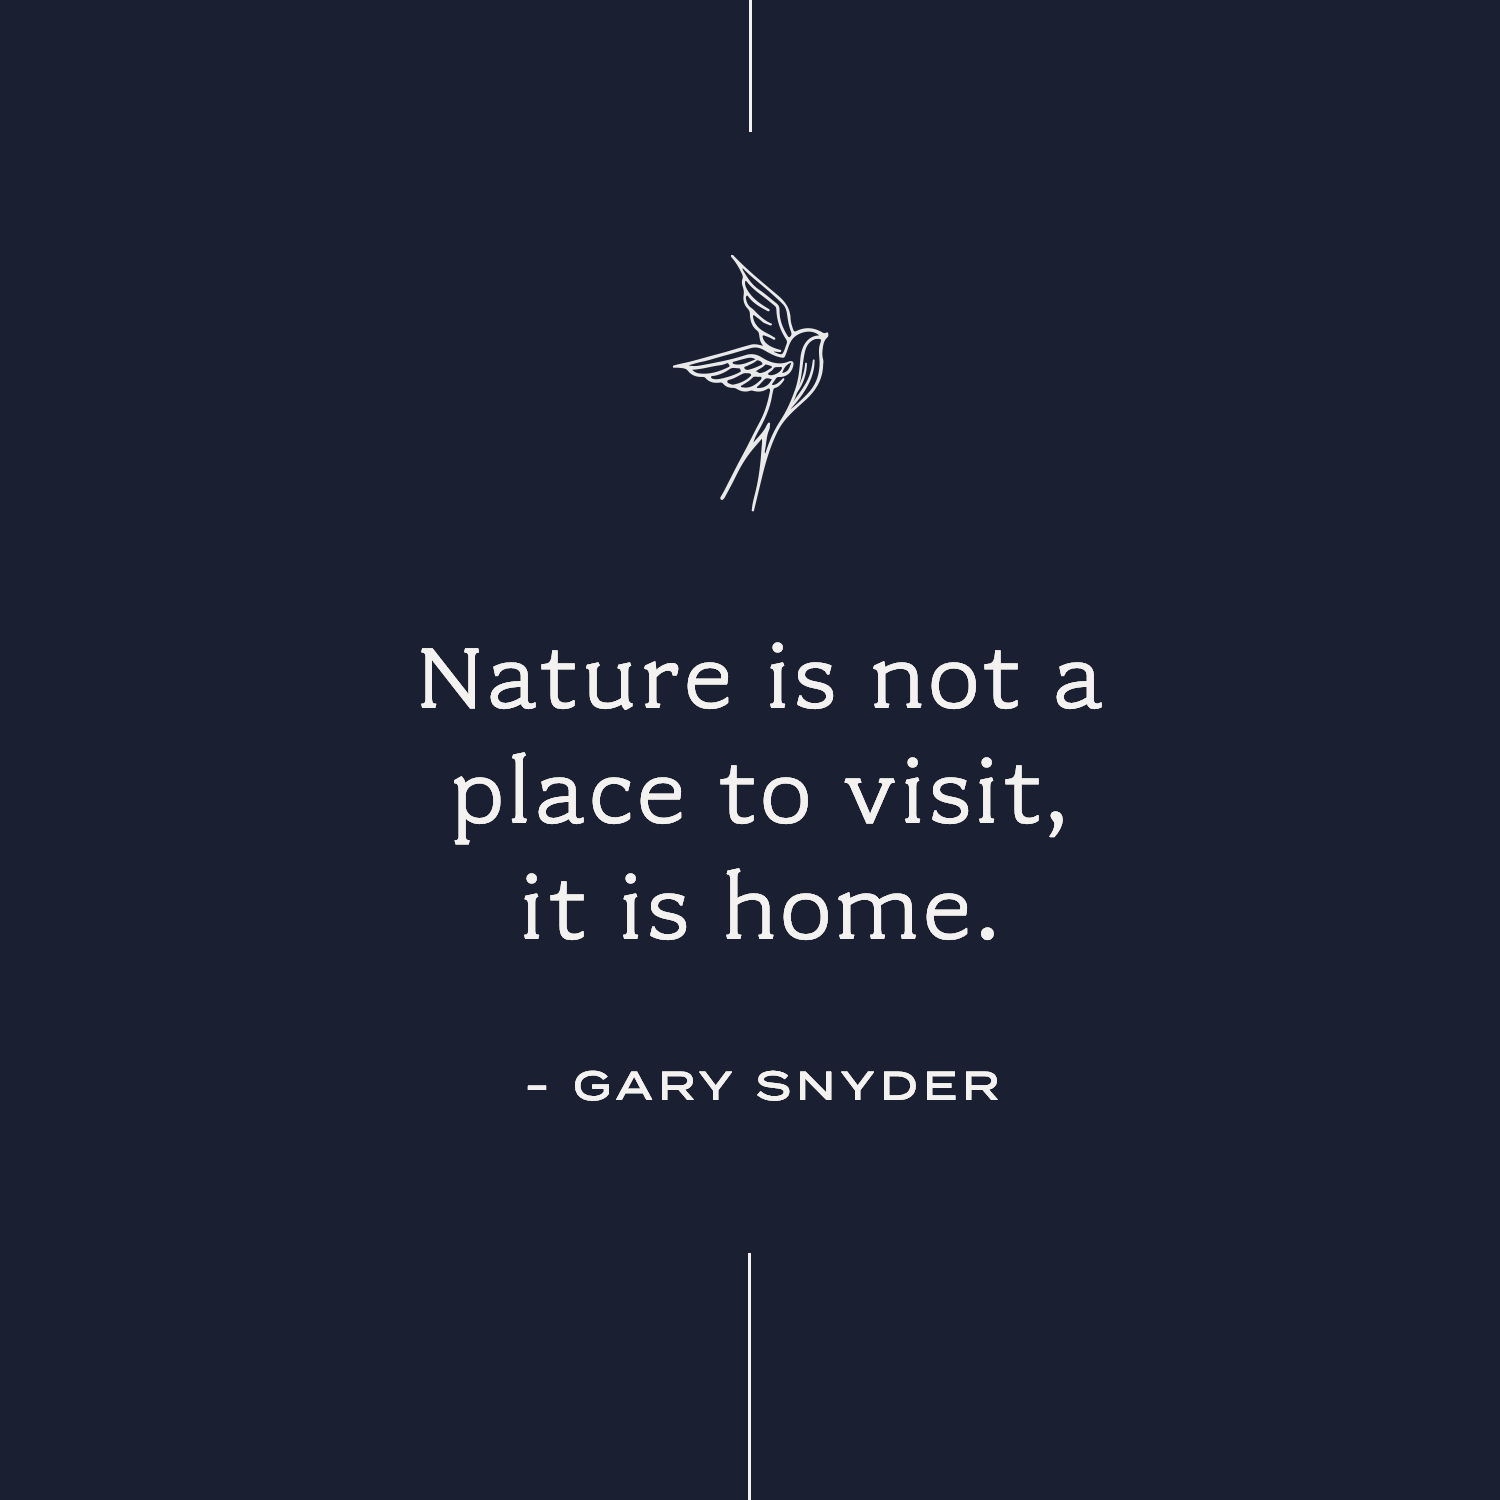 Quote: Nature is not a place to visit, it is home.